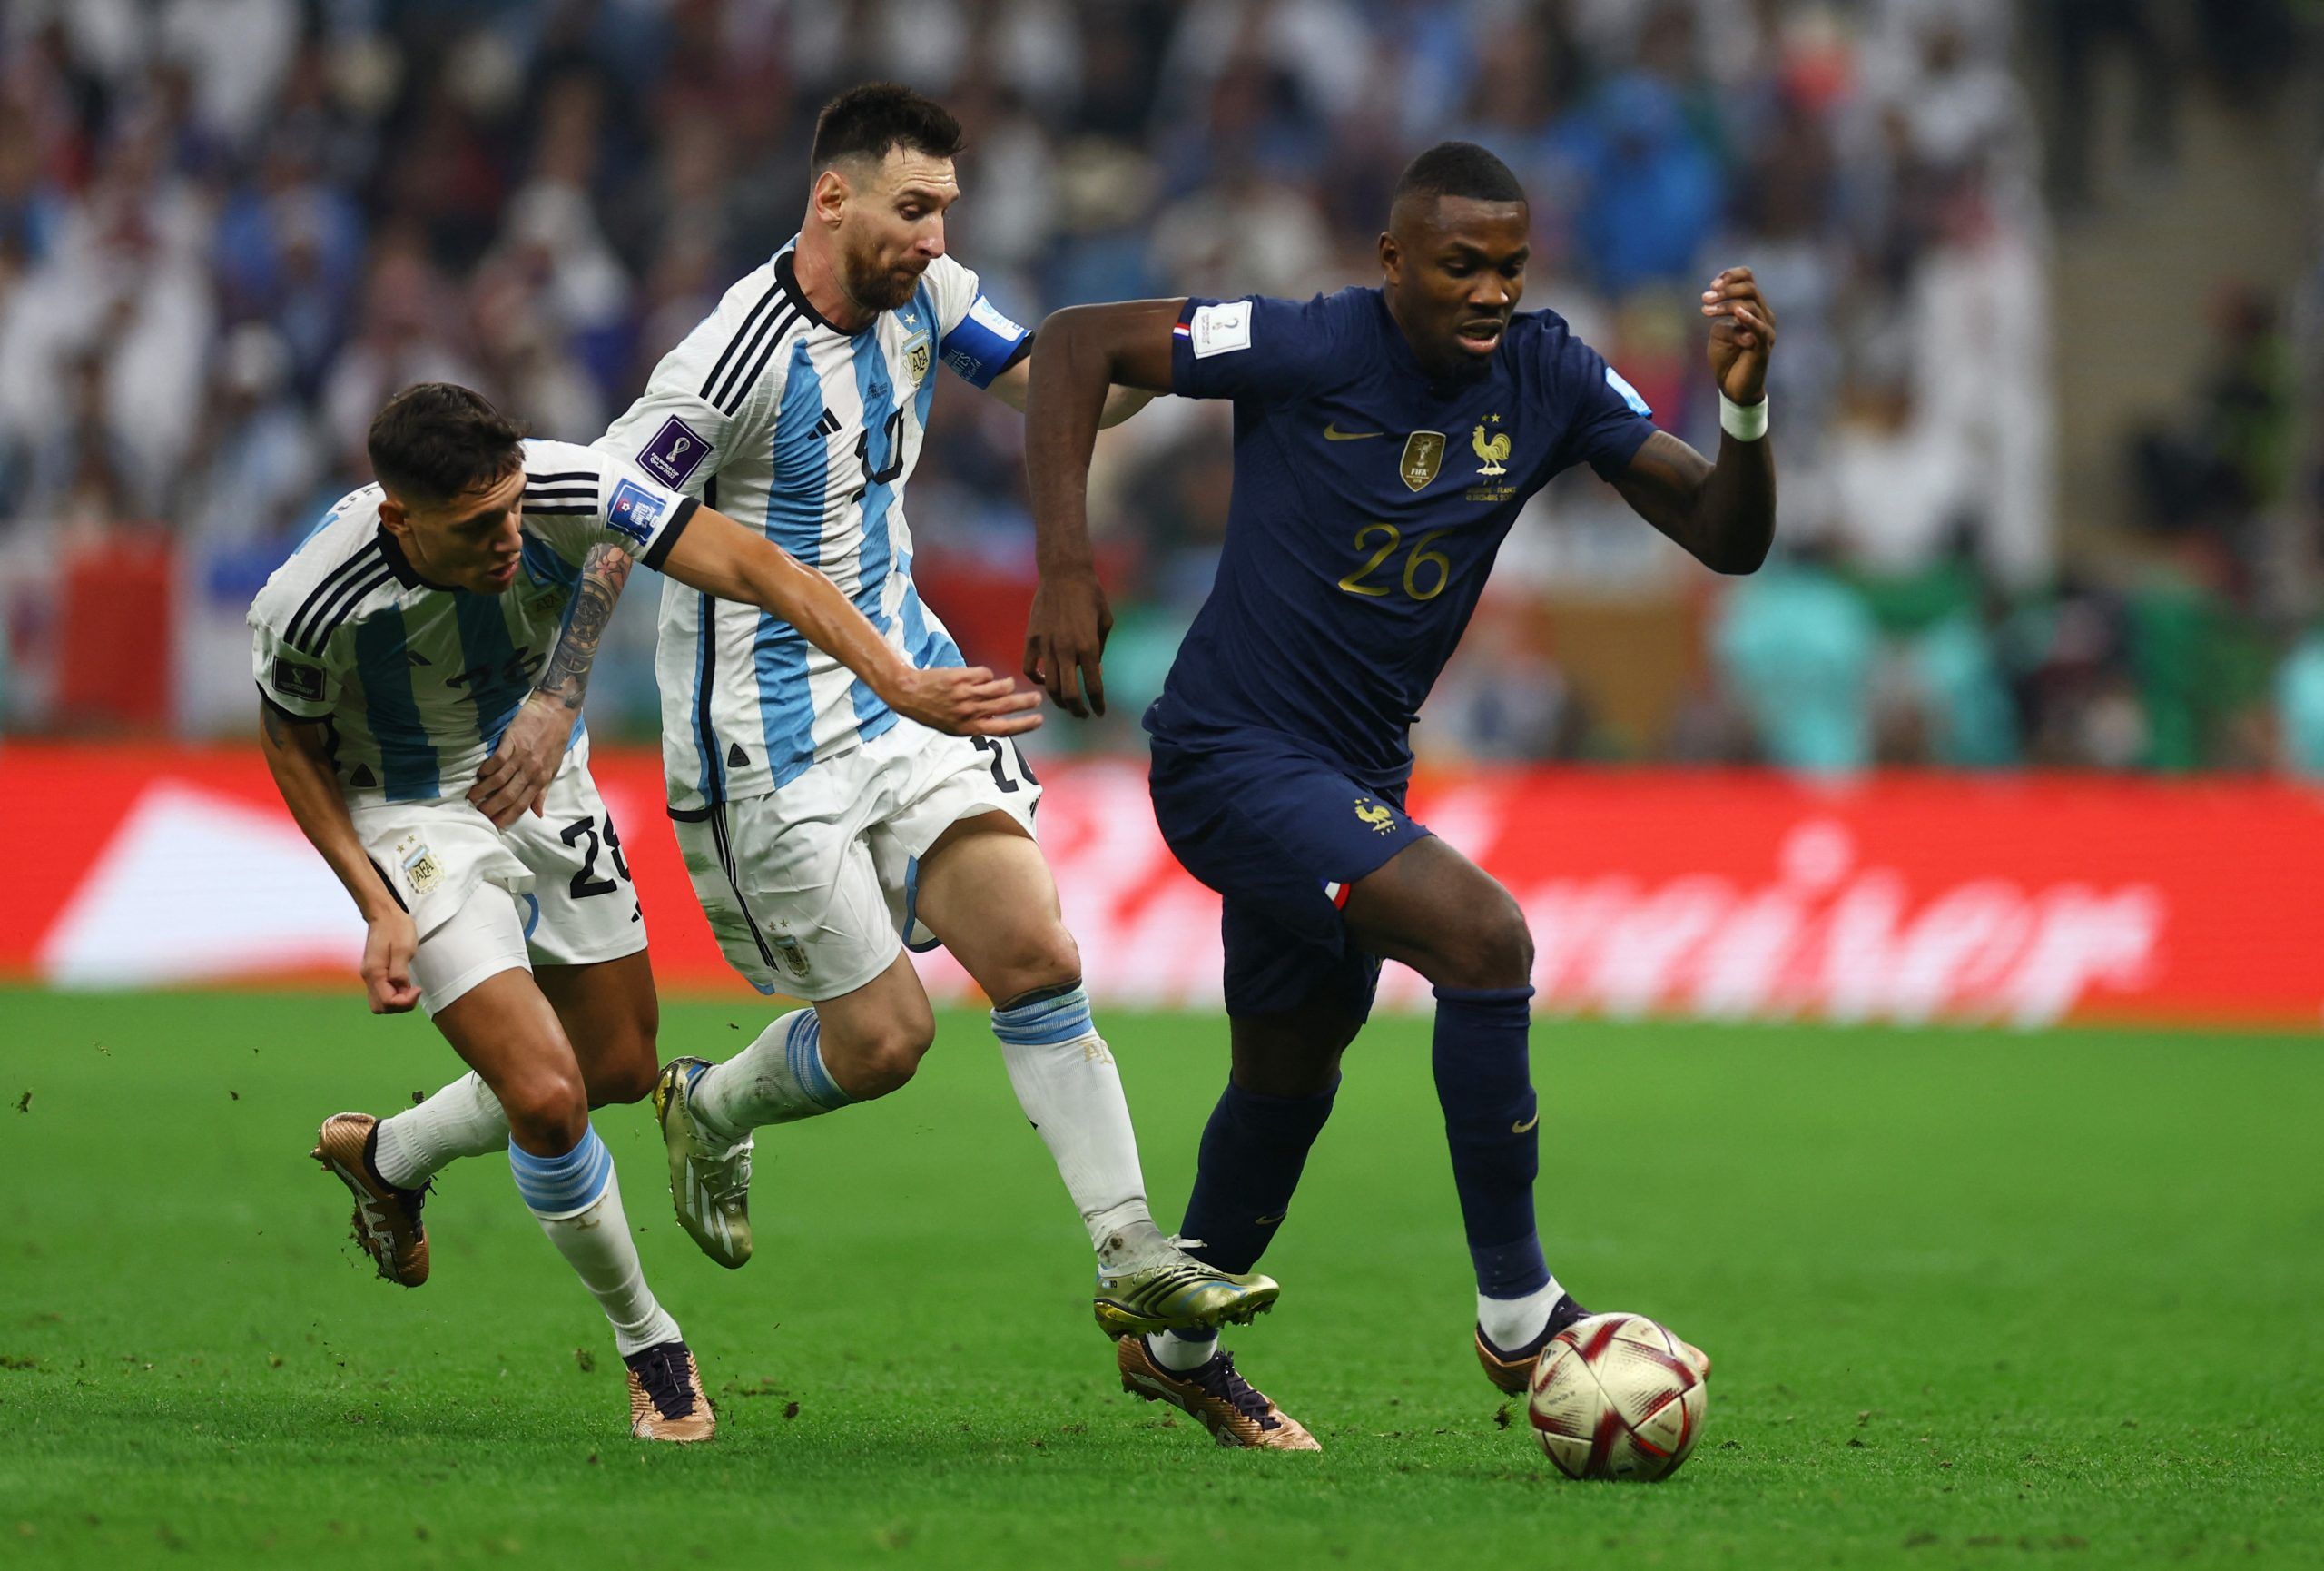 Soccer Football - FIFA World Cup Qatar 2022 - Final - Argentina v France - Lusail Stadium, Lusail, Qatar - December 18, 2022 France's Marcus Thuram in action with Argentina's Lionel Messi and Nahuel Molina REUTERS/Kai Pfaffenbach